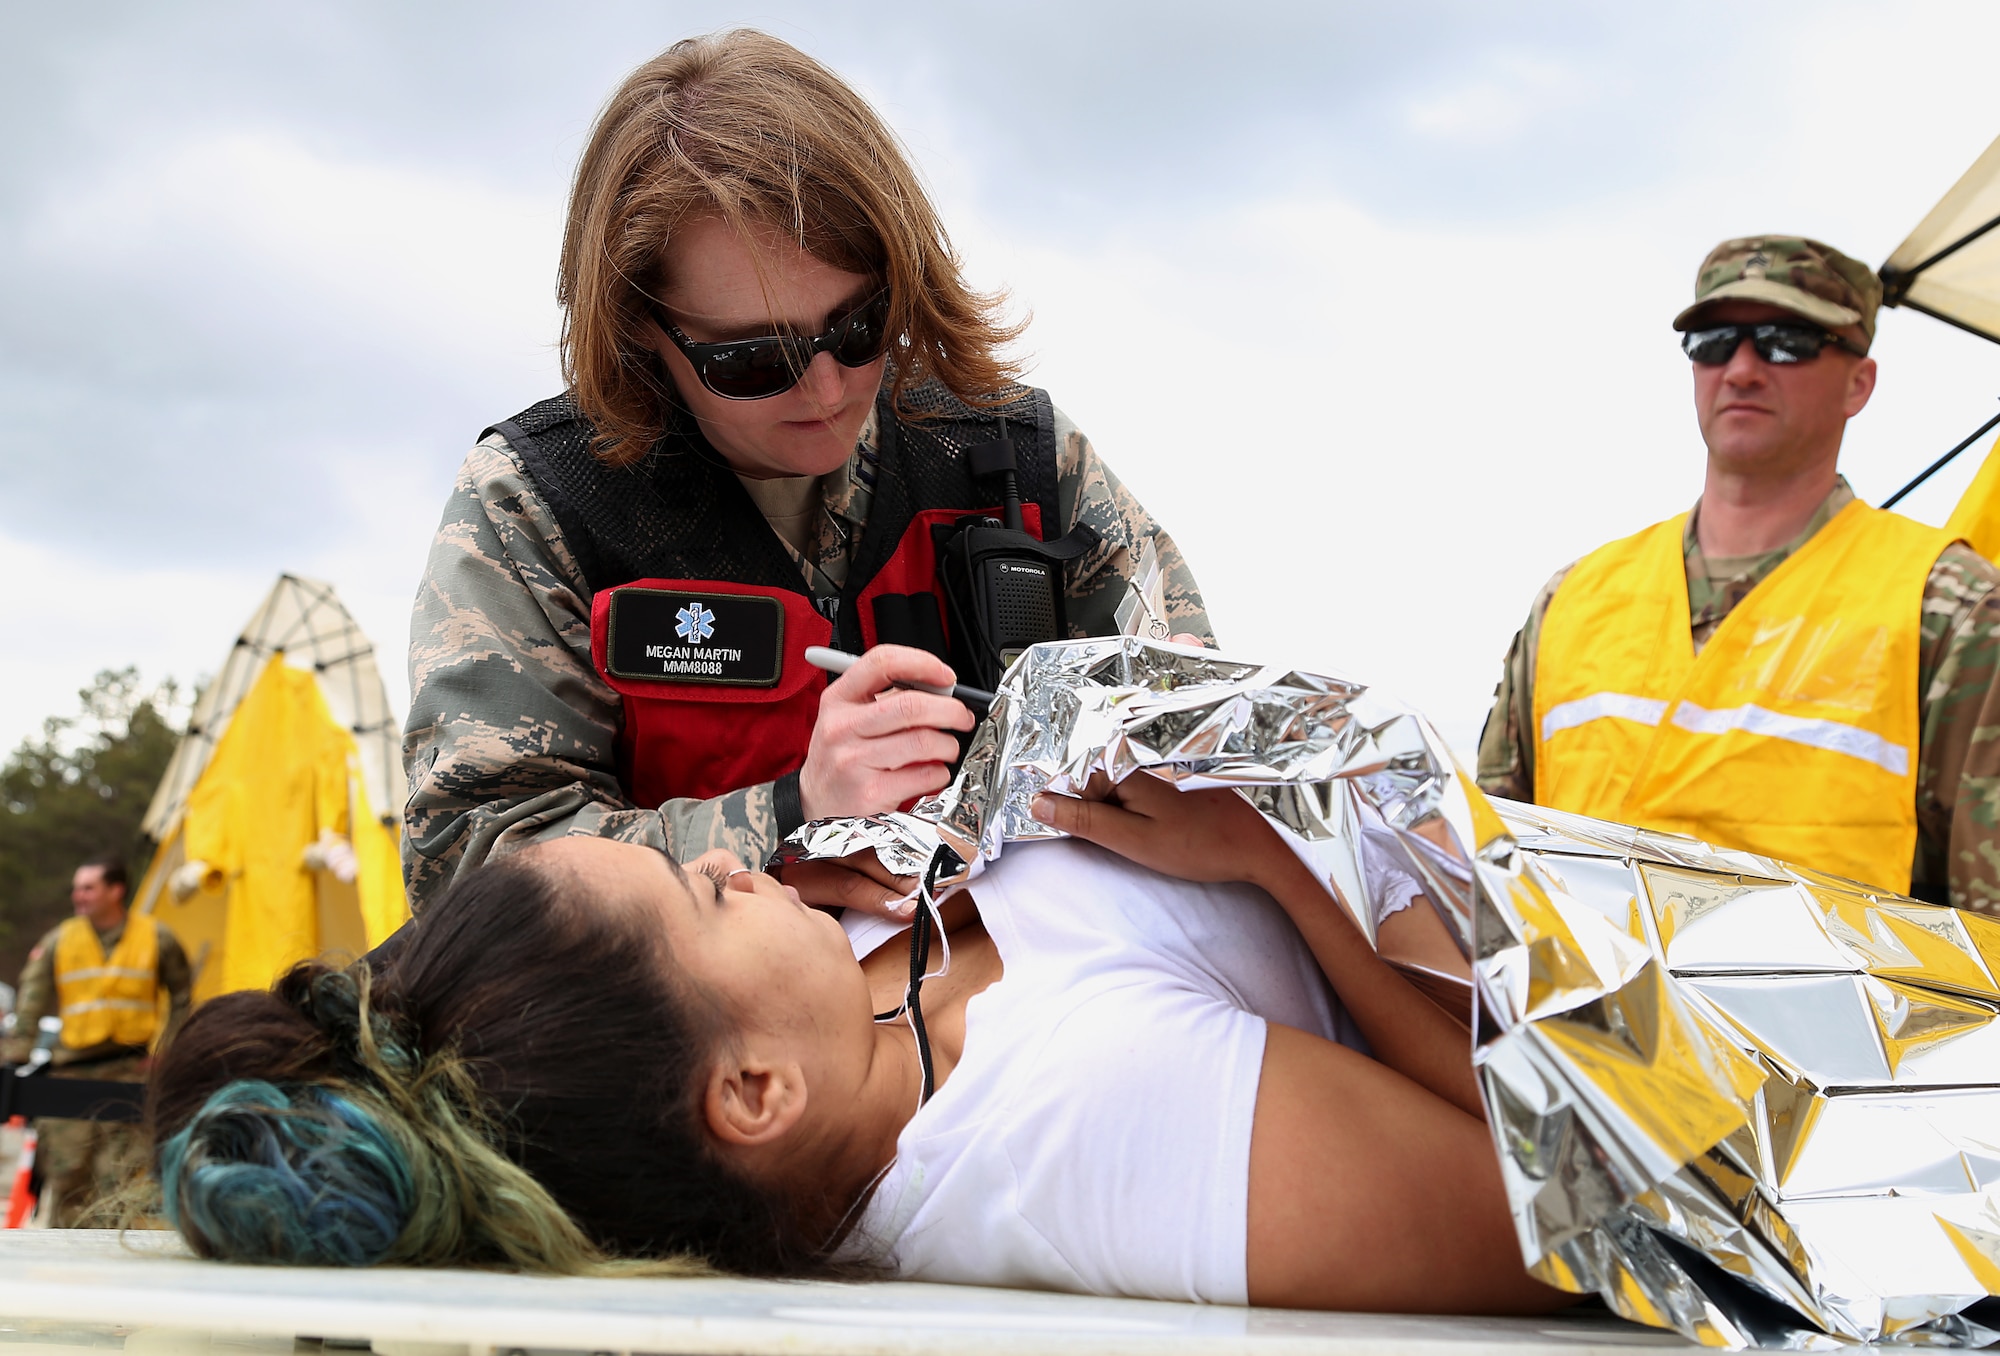 Capt. Megan C. Martin, a nurse assigned to the 157th Medical Group, N.H. Air National Guard, documents the condition of a simulated casualty onto a triage card during a deployment readiness exercise on April 11, 2018 at Joint Base Cape Cod, Mass. Martin is a member of the New England CBRNE Enhanced Response Force Package team. (N.H. Air National Guard photo by Staff Sgt. Kayla White)